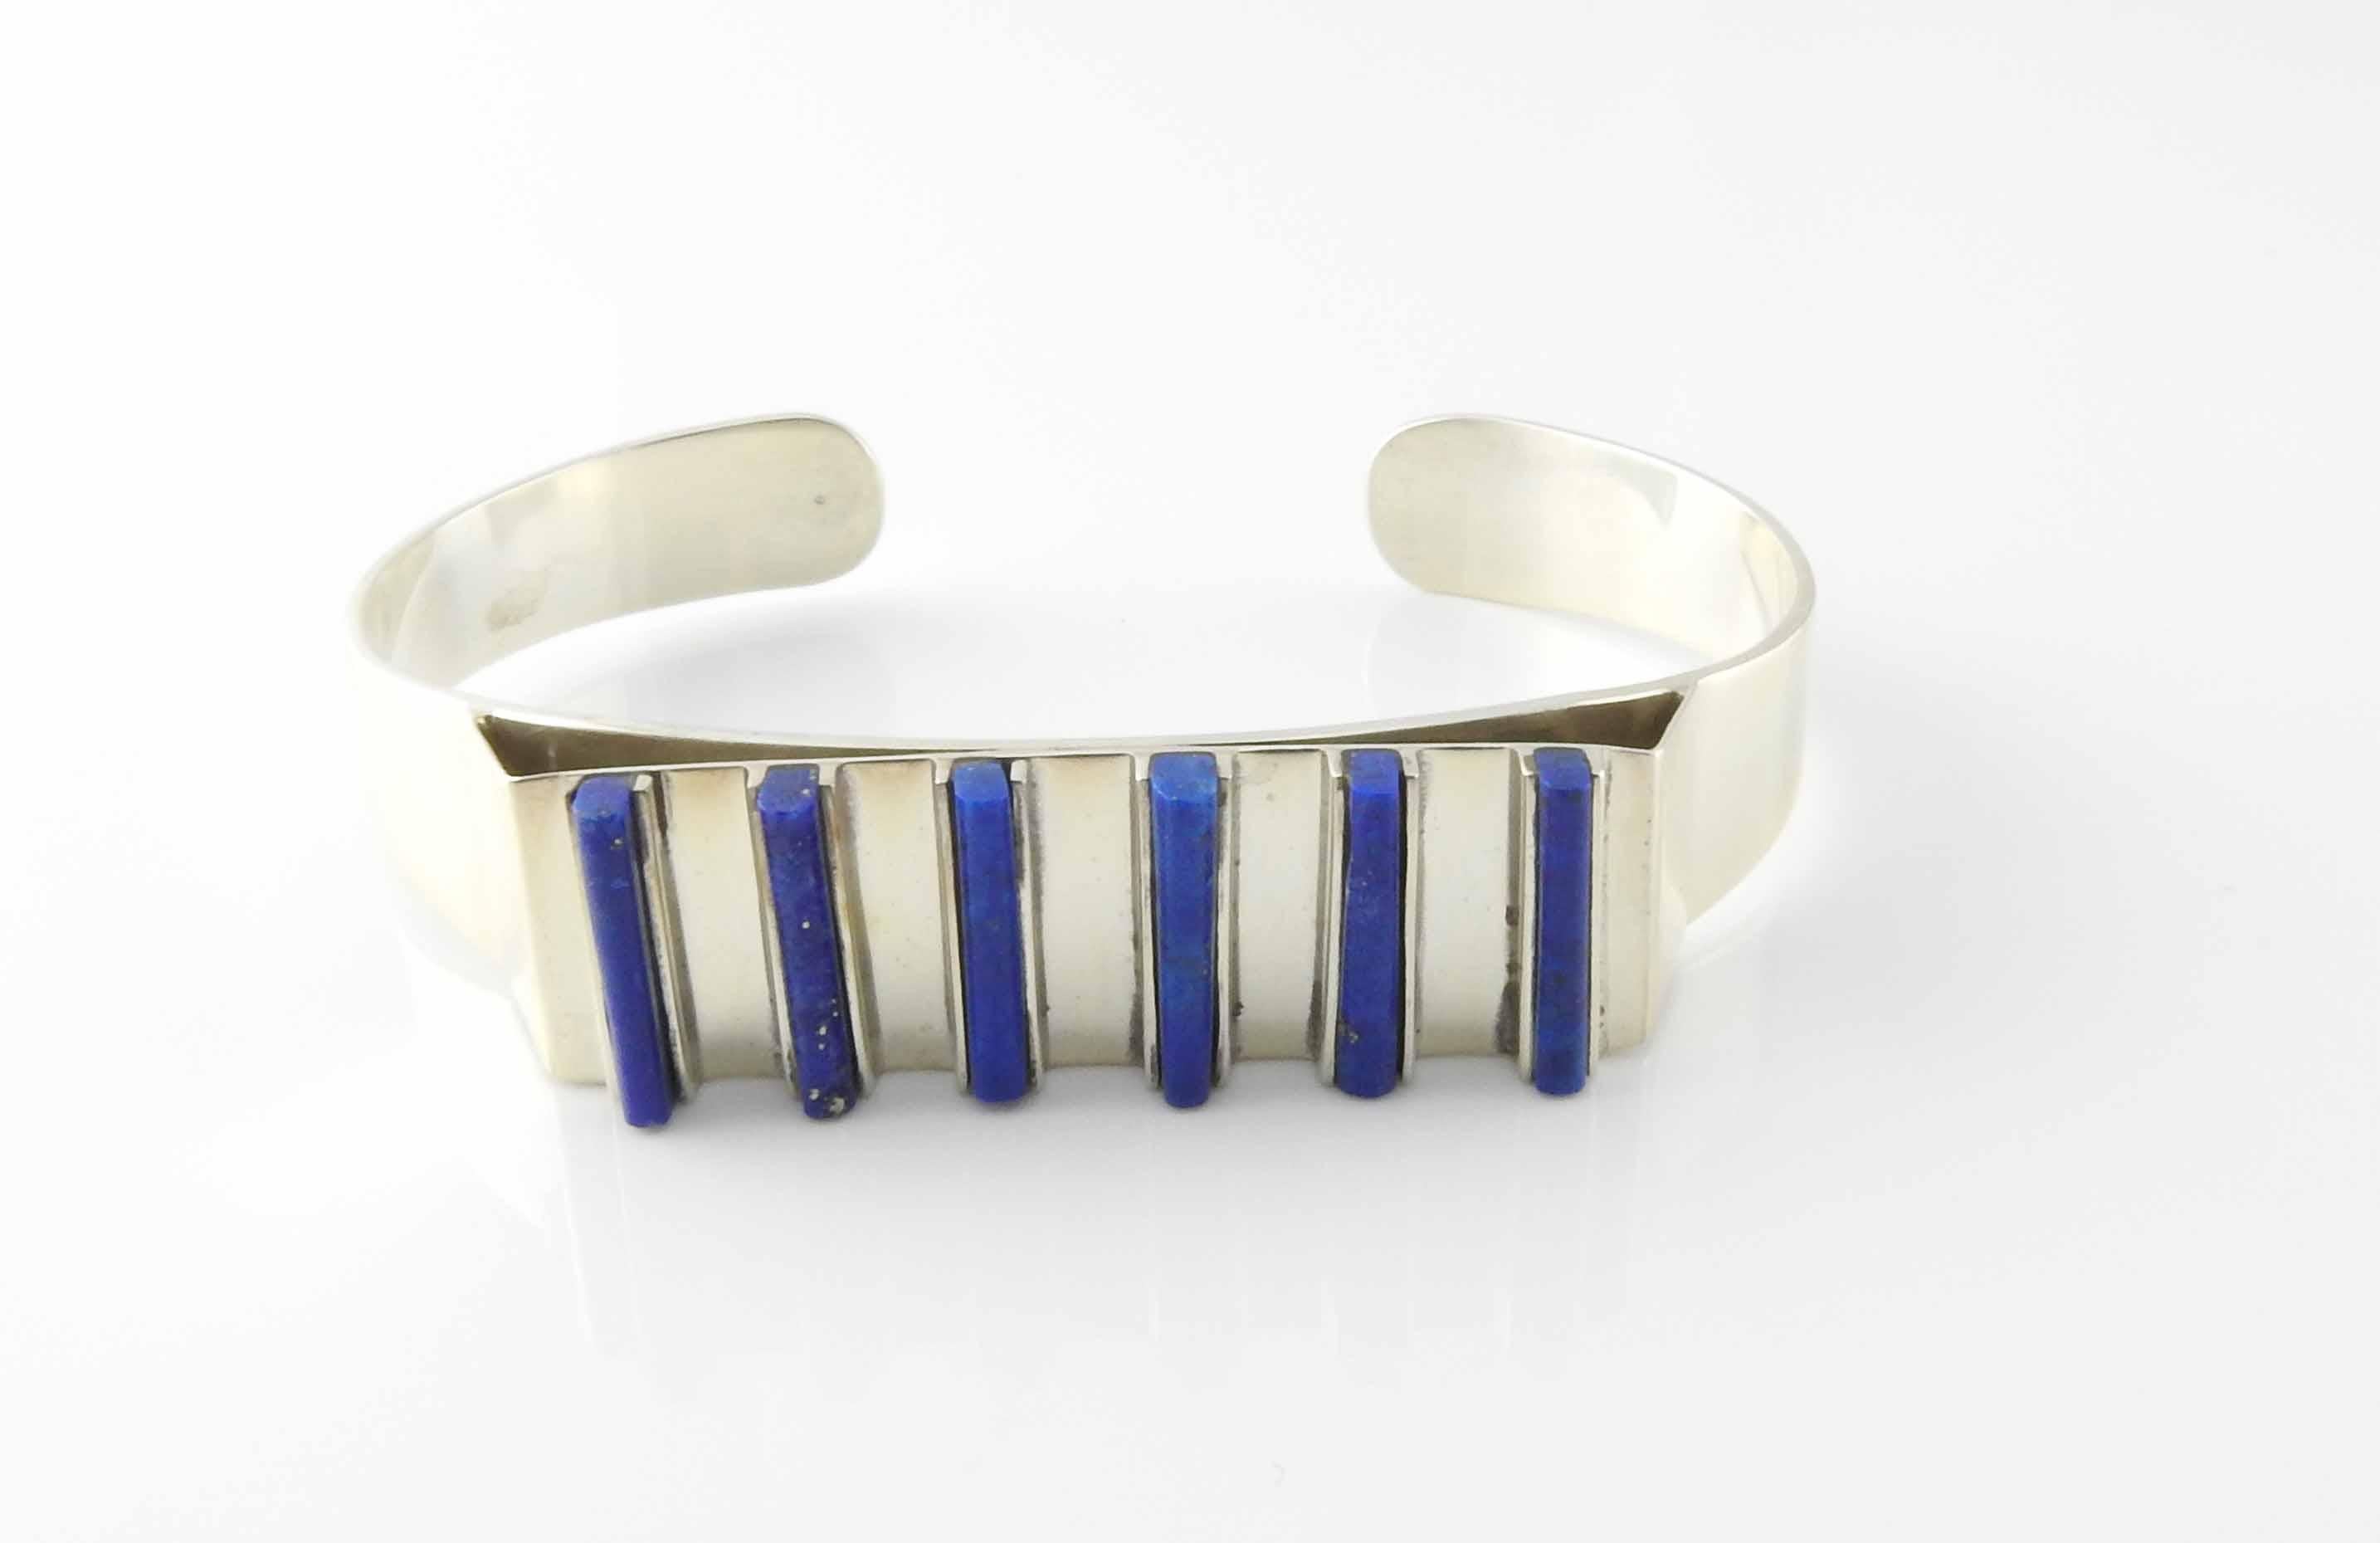 Taxco Mexico sterling siver lapis lazuli cuff bracelet.

Marked: TAXCO 925 MEXICO, J. GOMES, TG-38.

Measures: 5 15/26